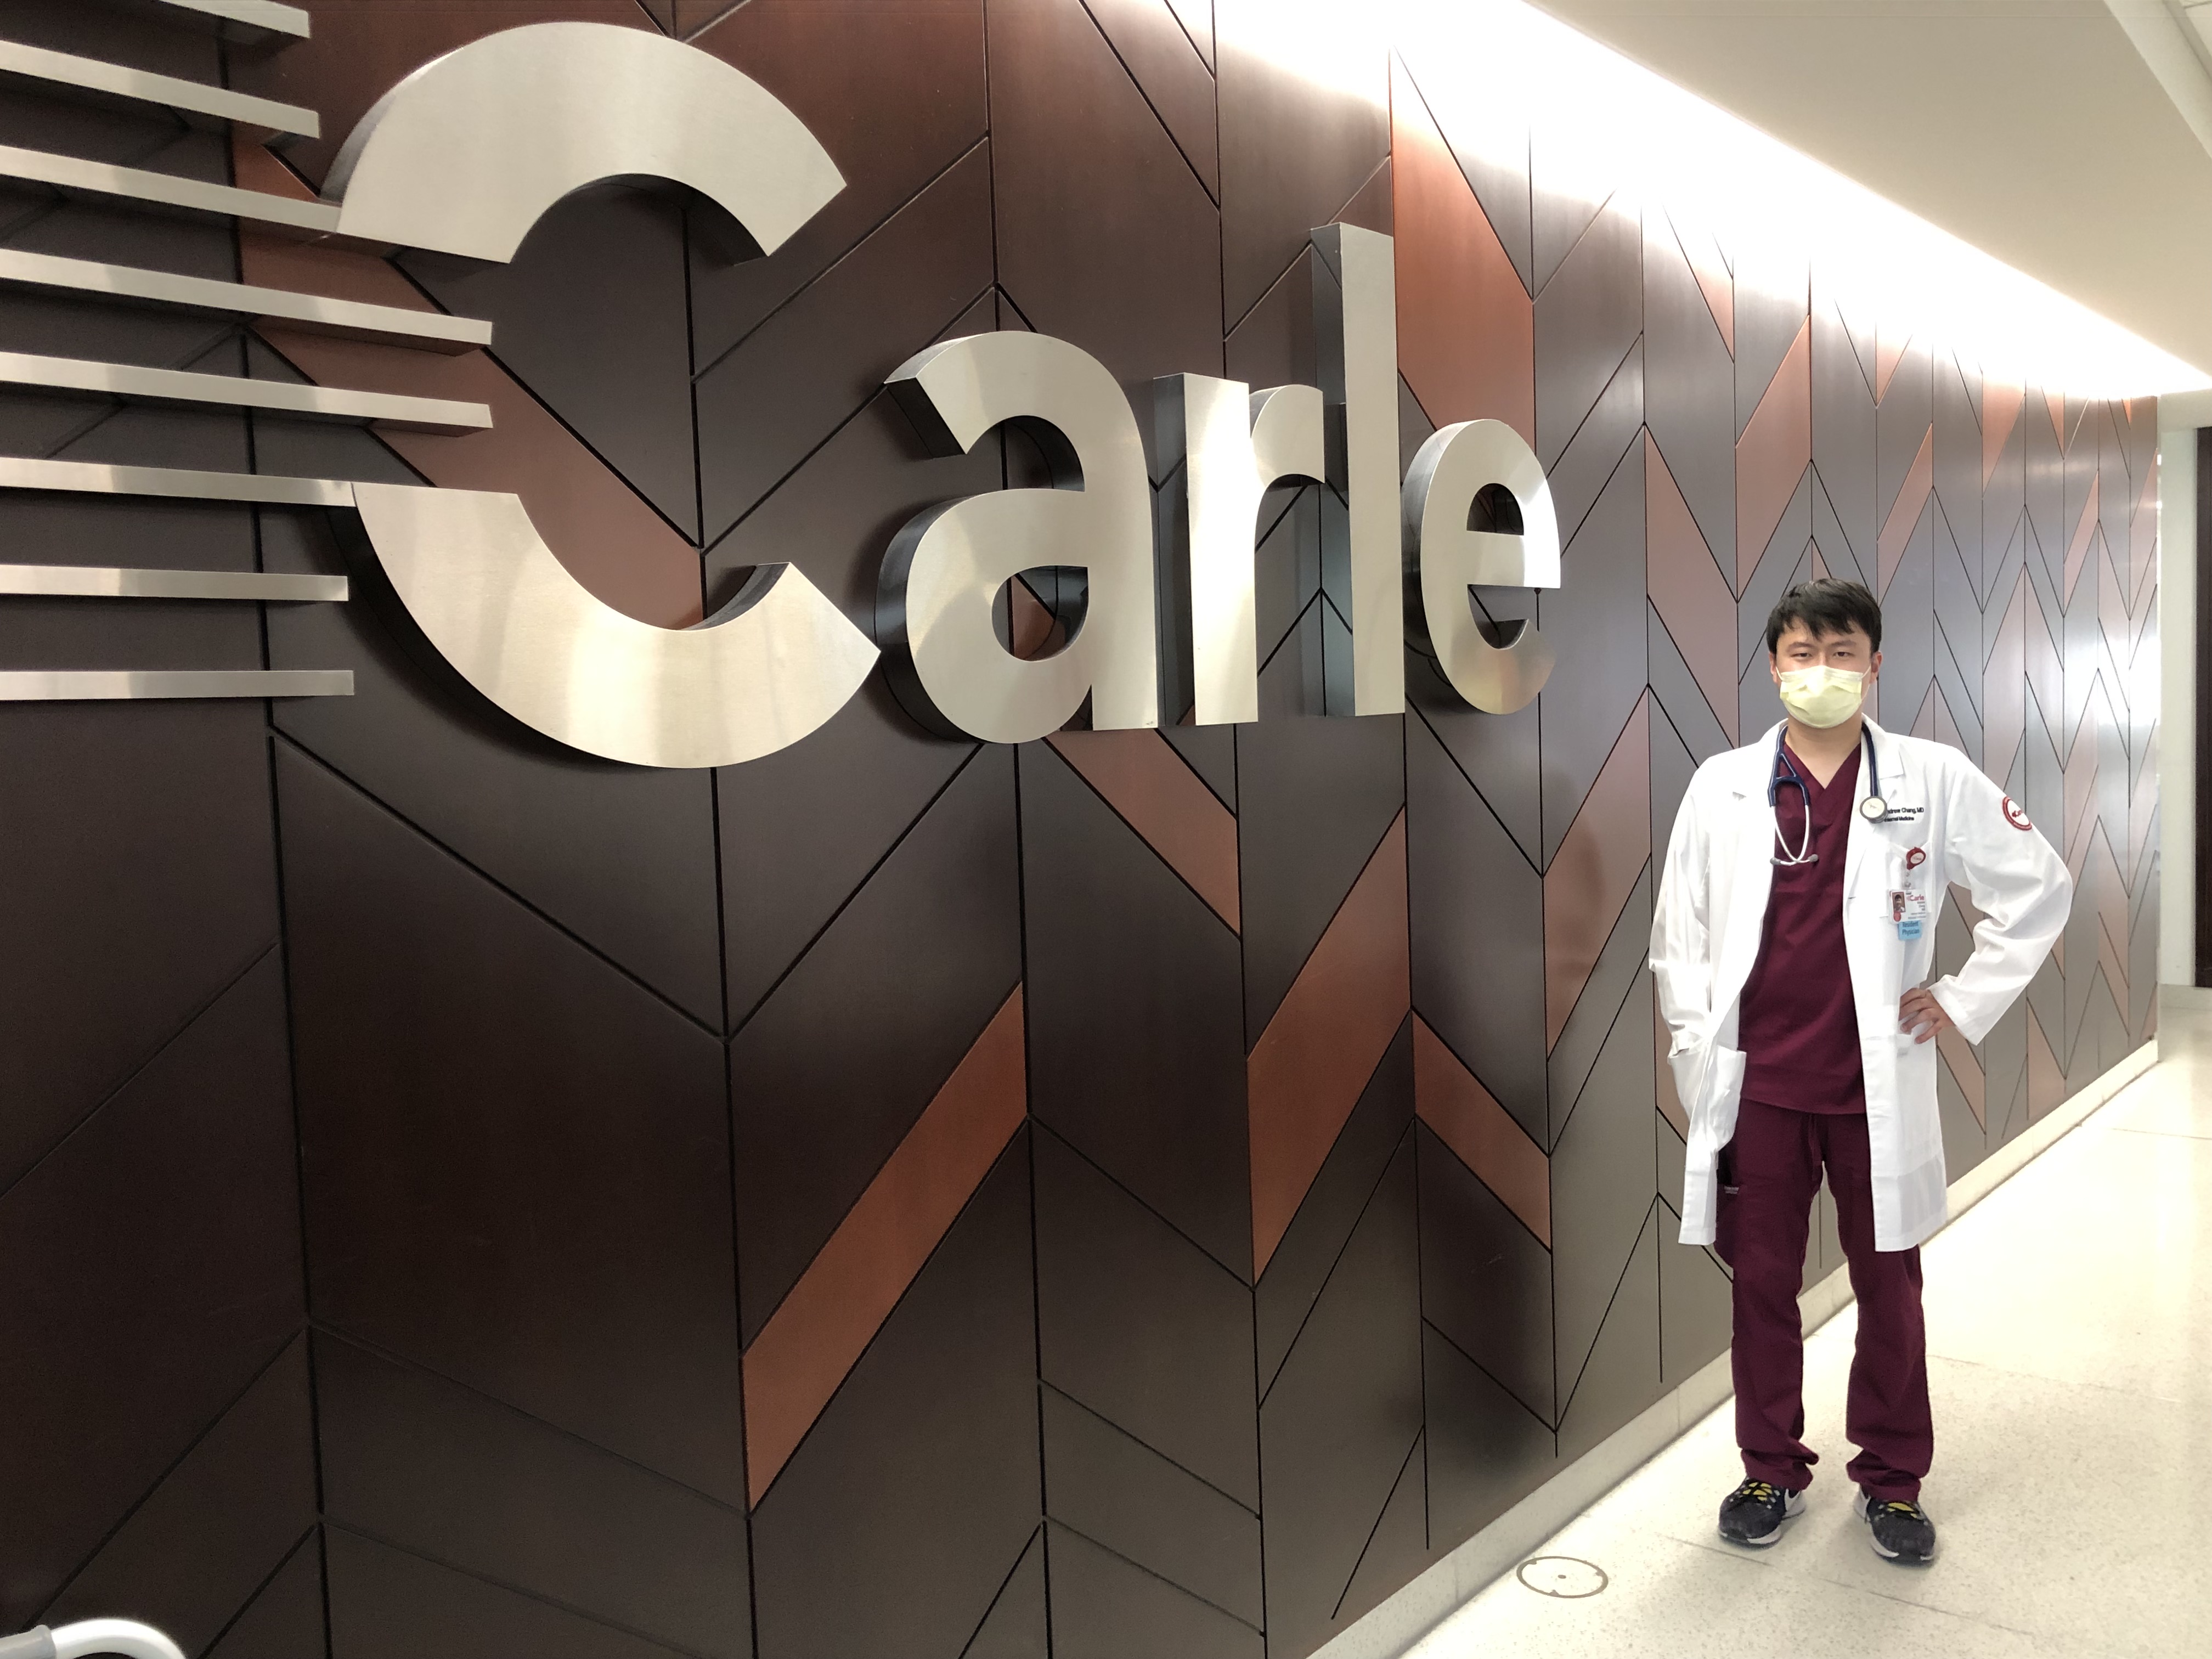 Two doctors at Carle Foundation Hospital share insight about first year of residency